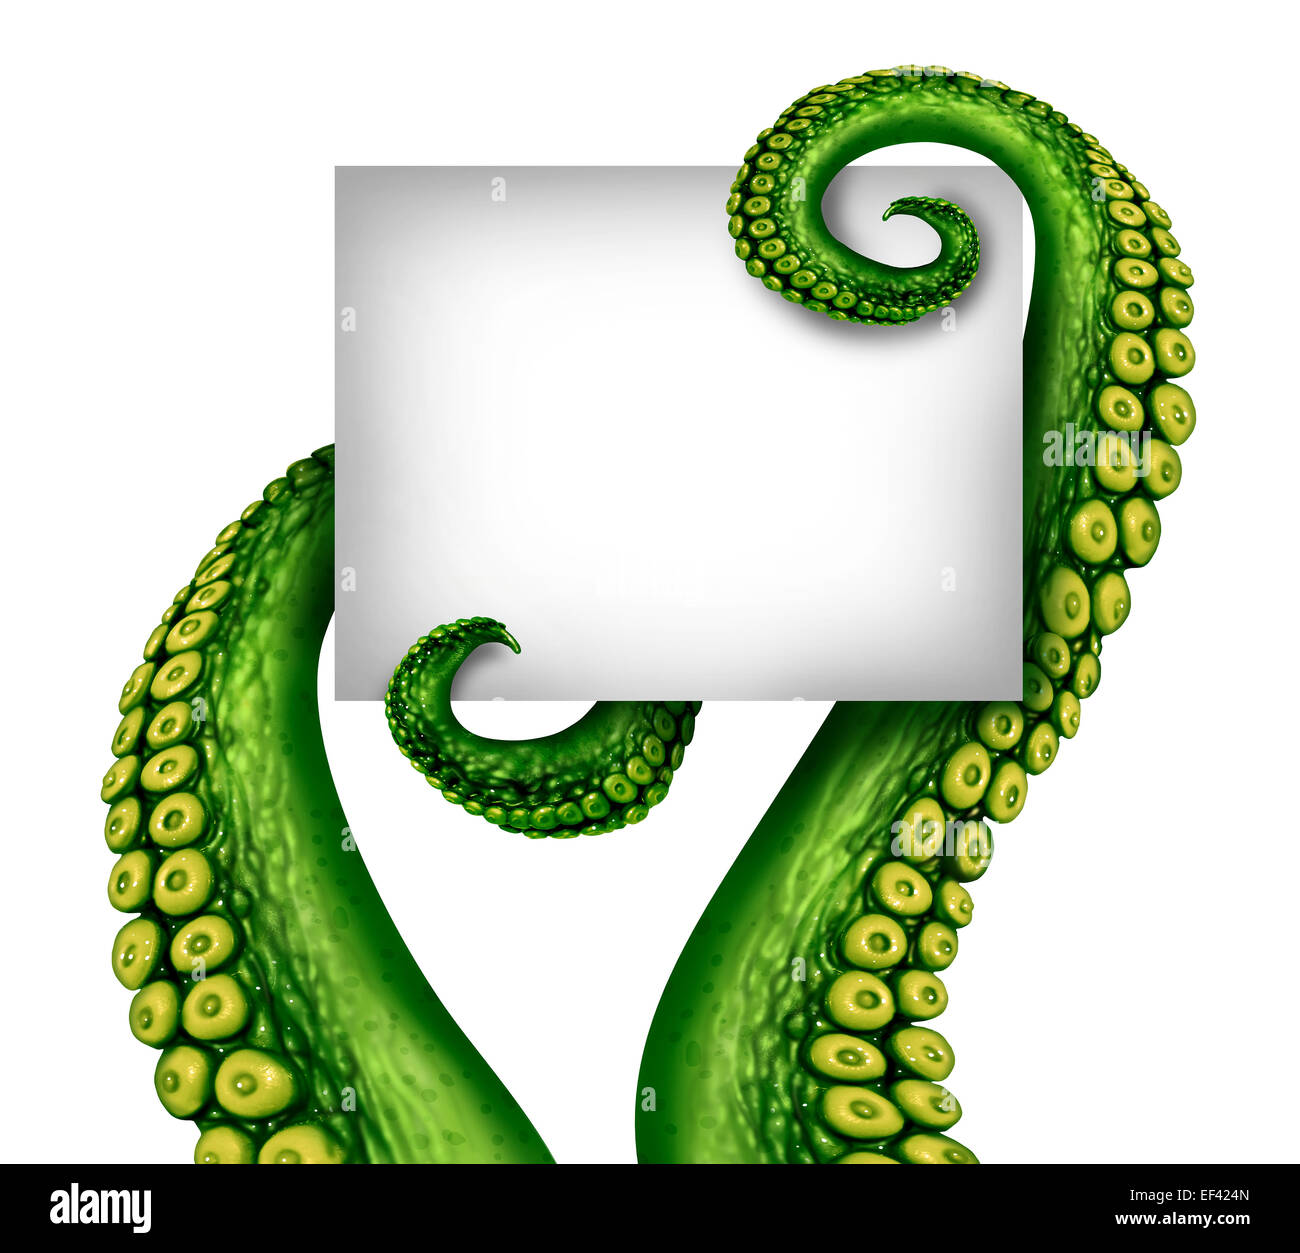 Alien blank sign with creepy green ufo tentacle arms holding a white banner with copy space as a symbol for fantasy science fiction and scary creatures from outer space. Stock Photo